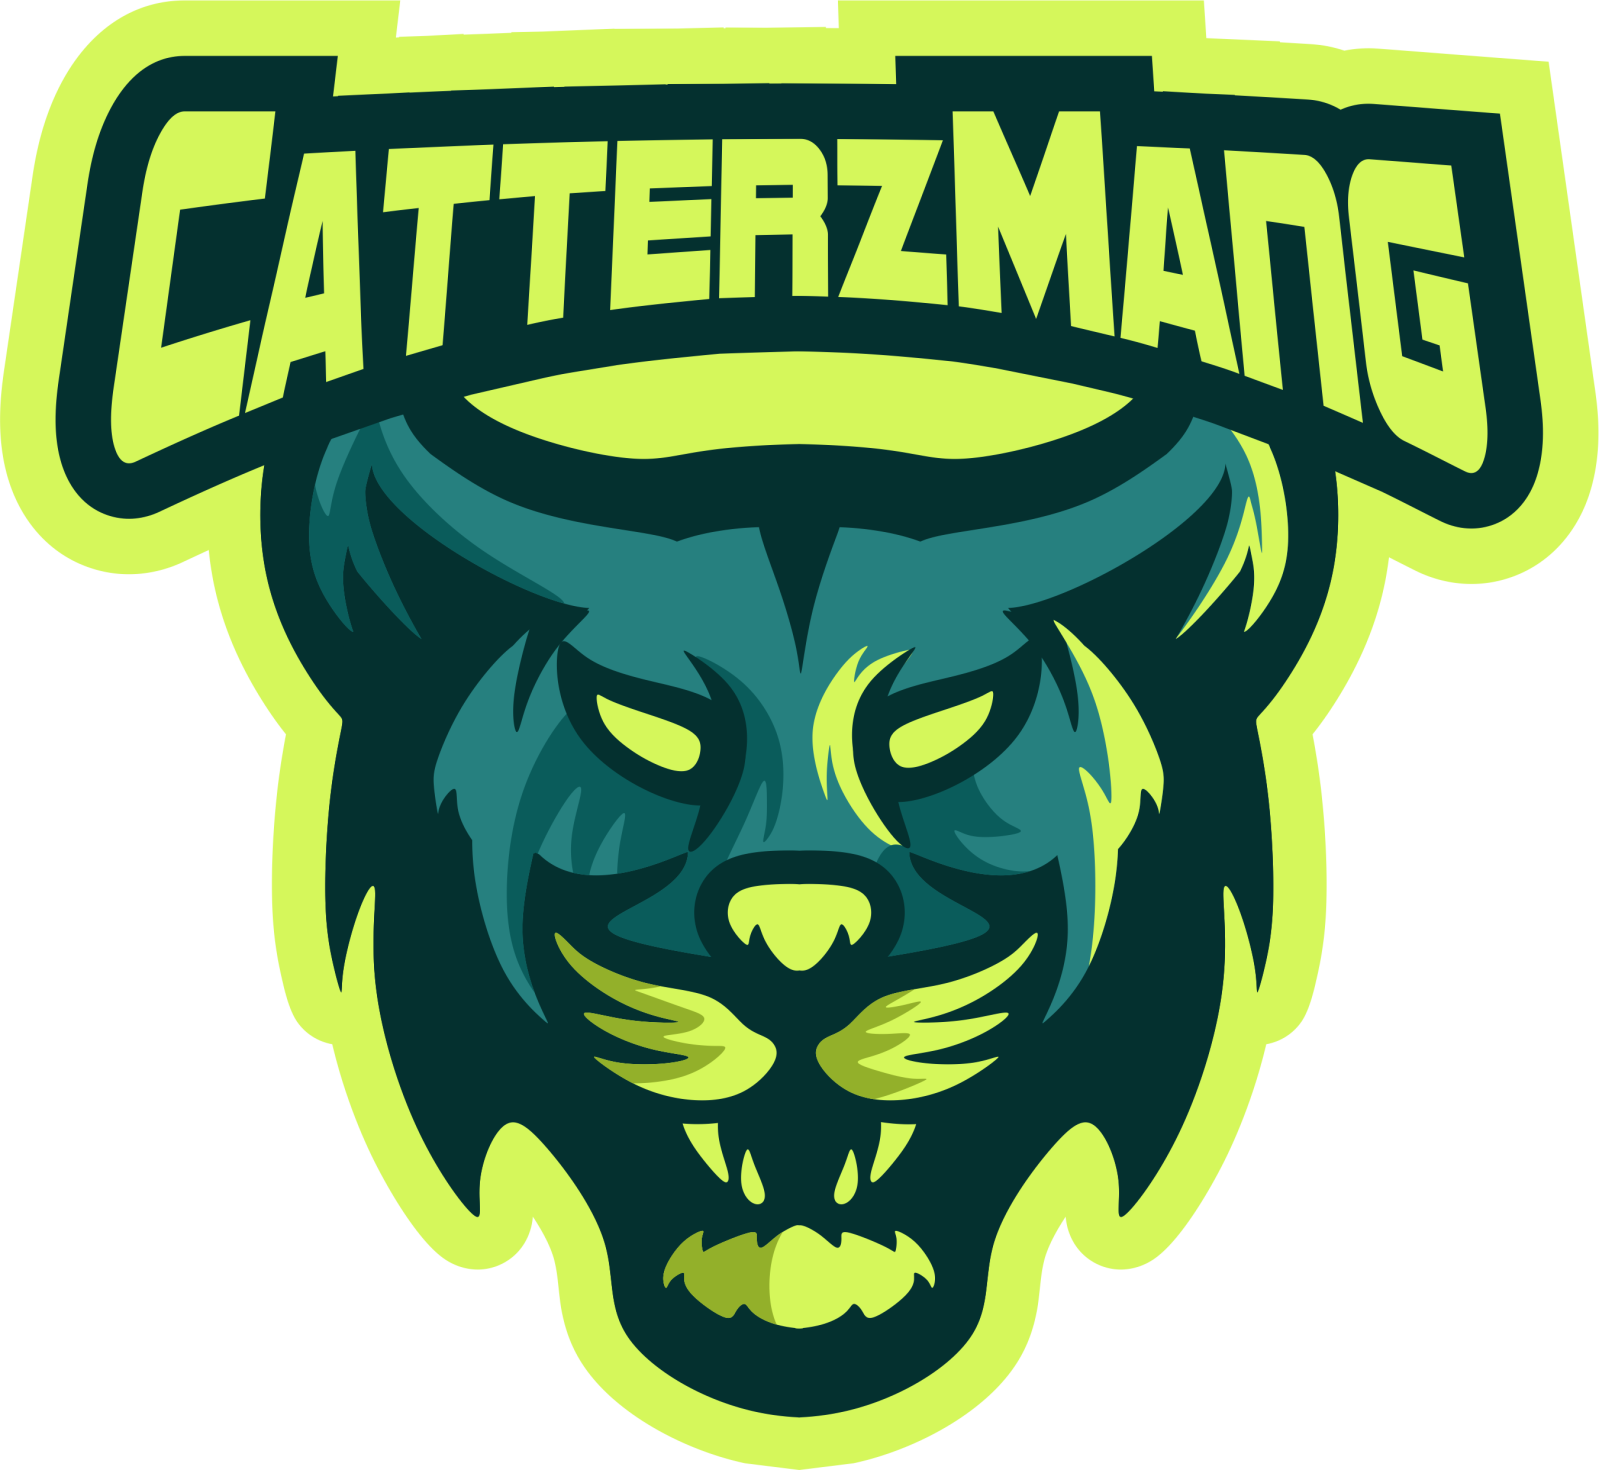 Thanks For Taking The Time And Dropping By The Stream - Catterzmang (1599x1470)